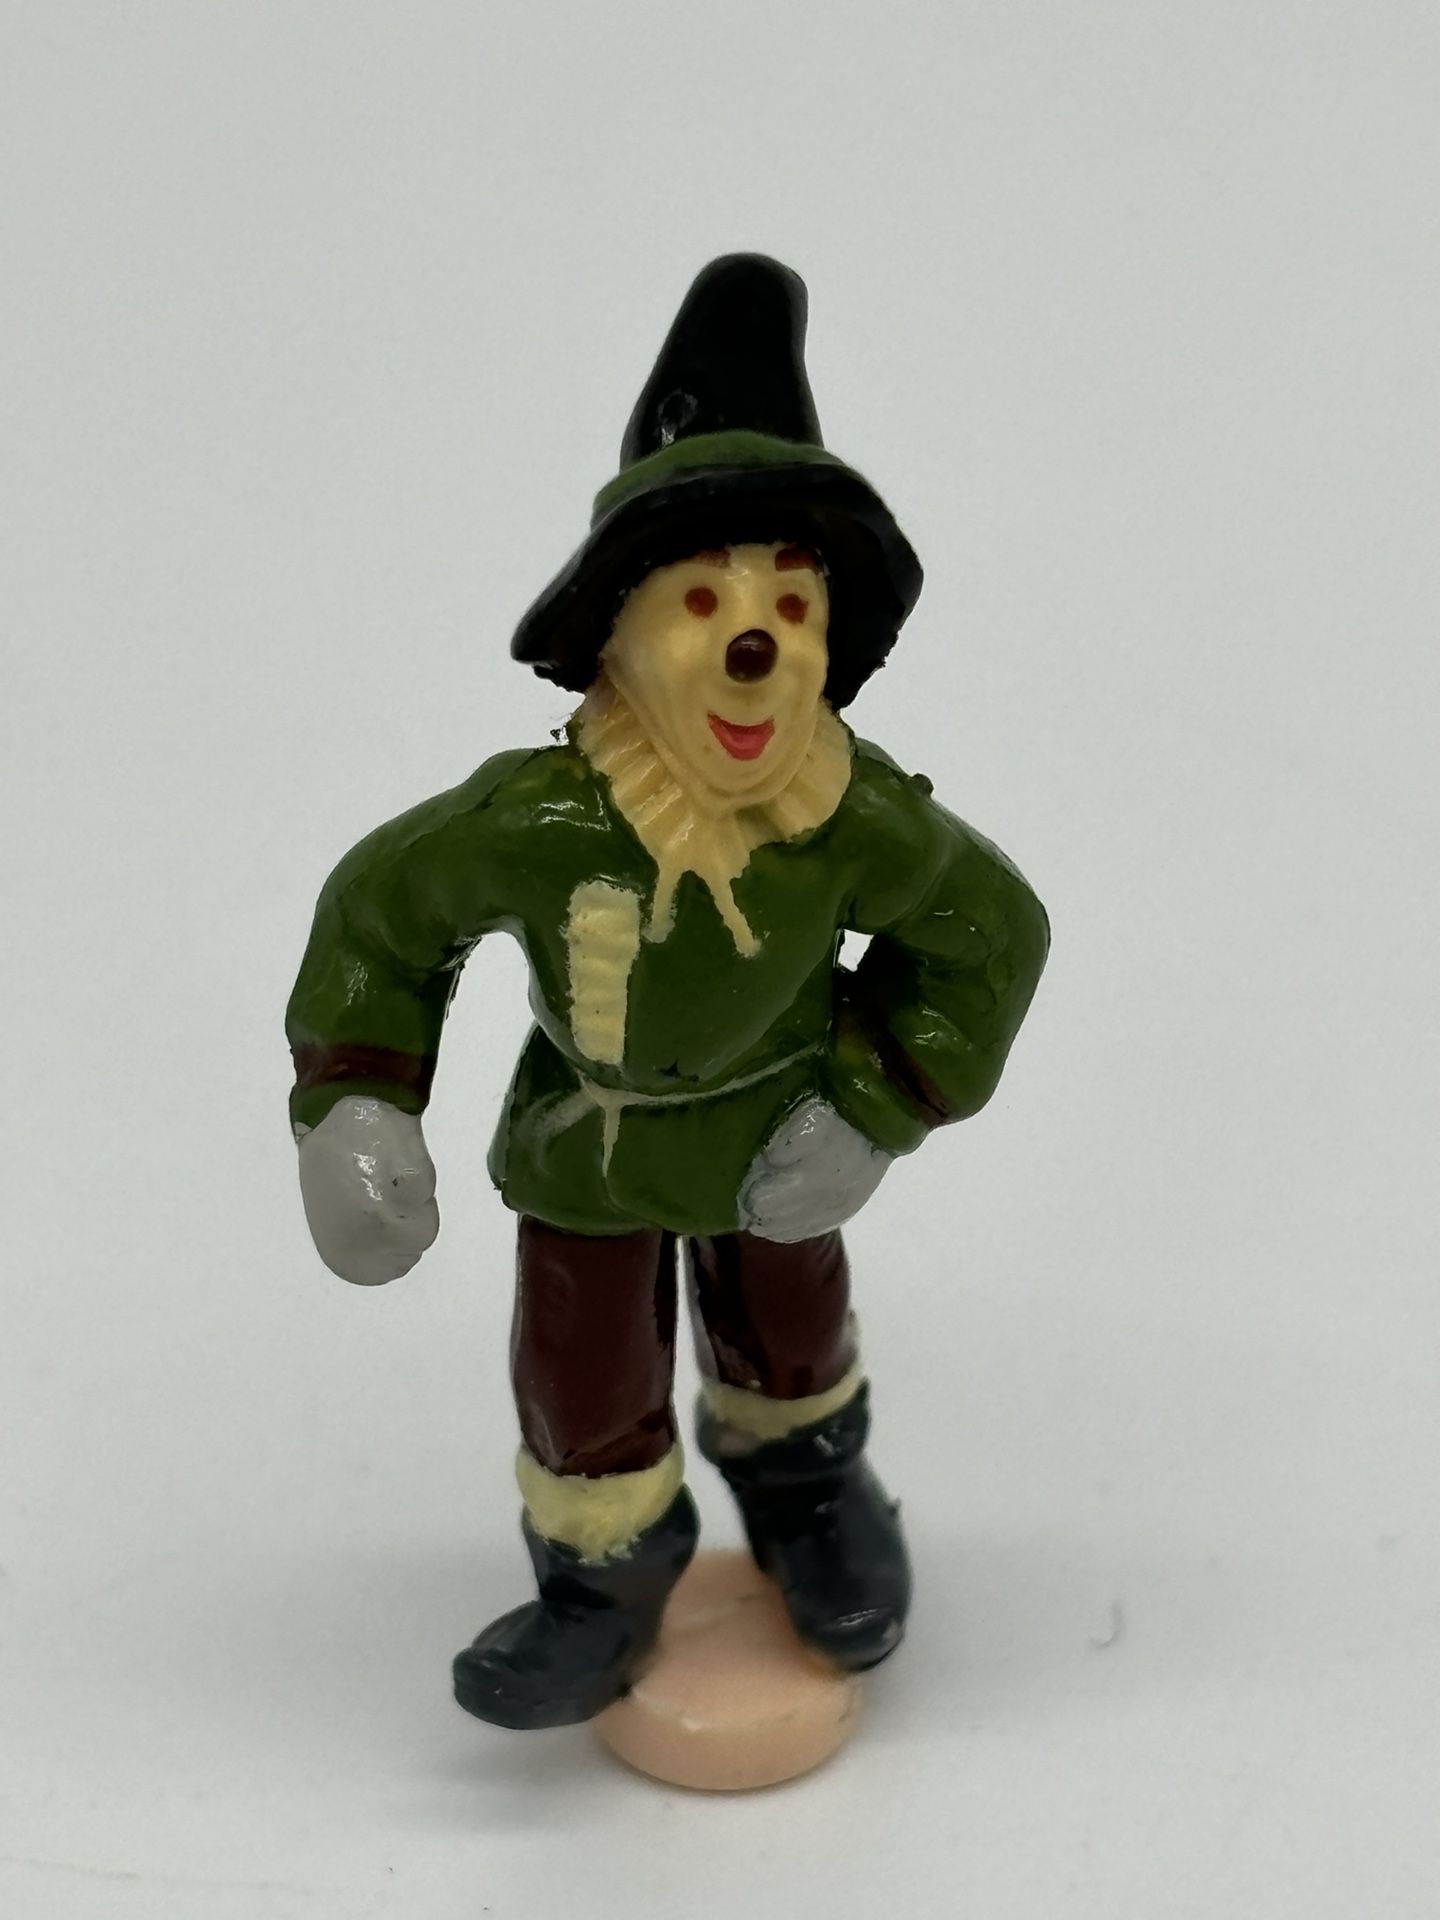 Vintage Polly Pocket Wizard of Oz Emerald City Playset Scarecrow Figure Only 